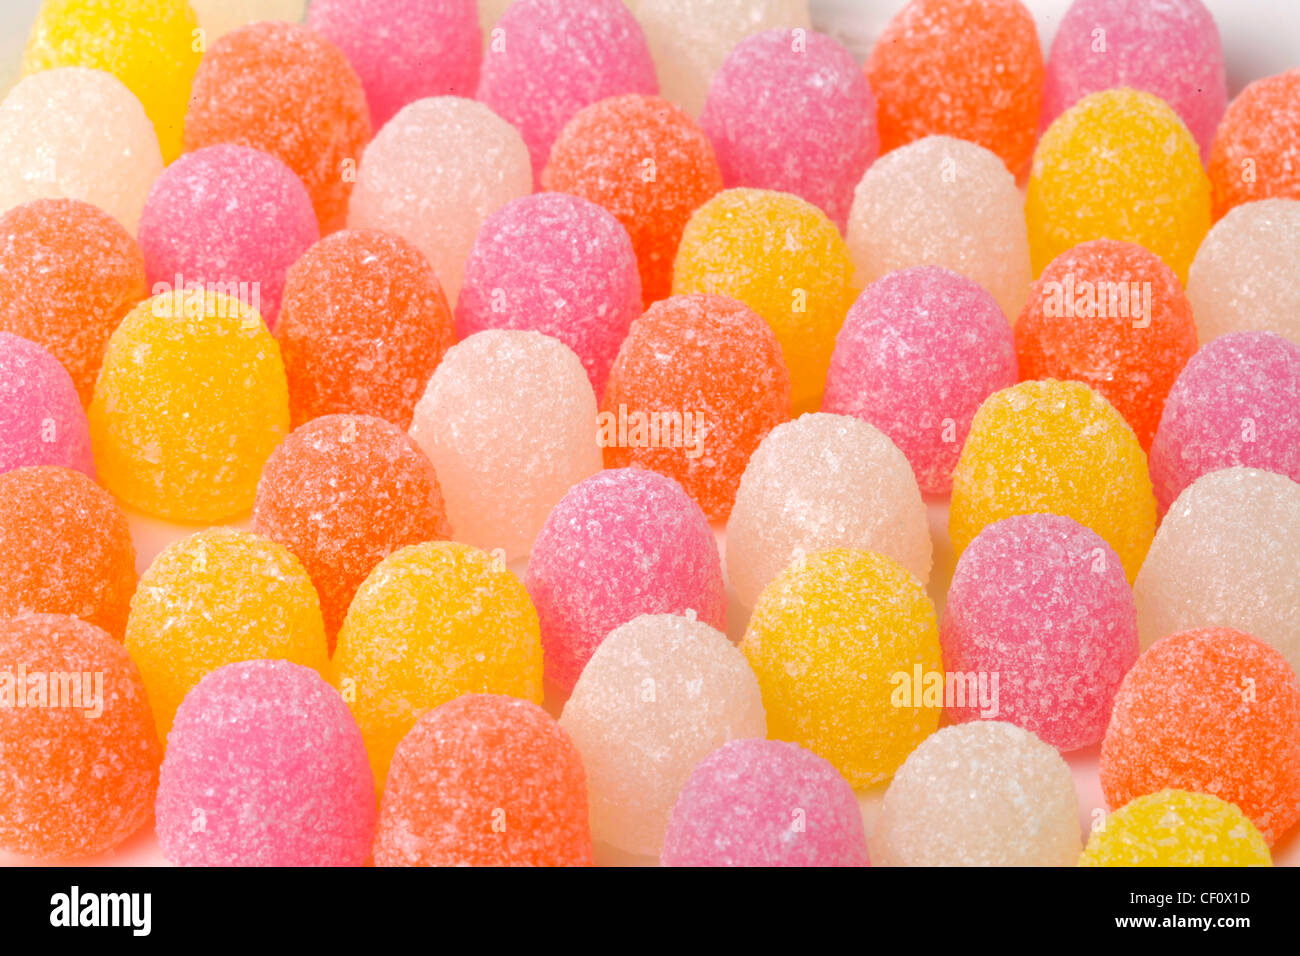 TRADITIONAL USA CANDY Stock Photo